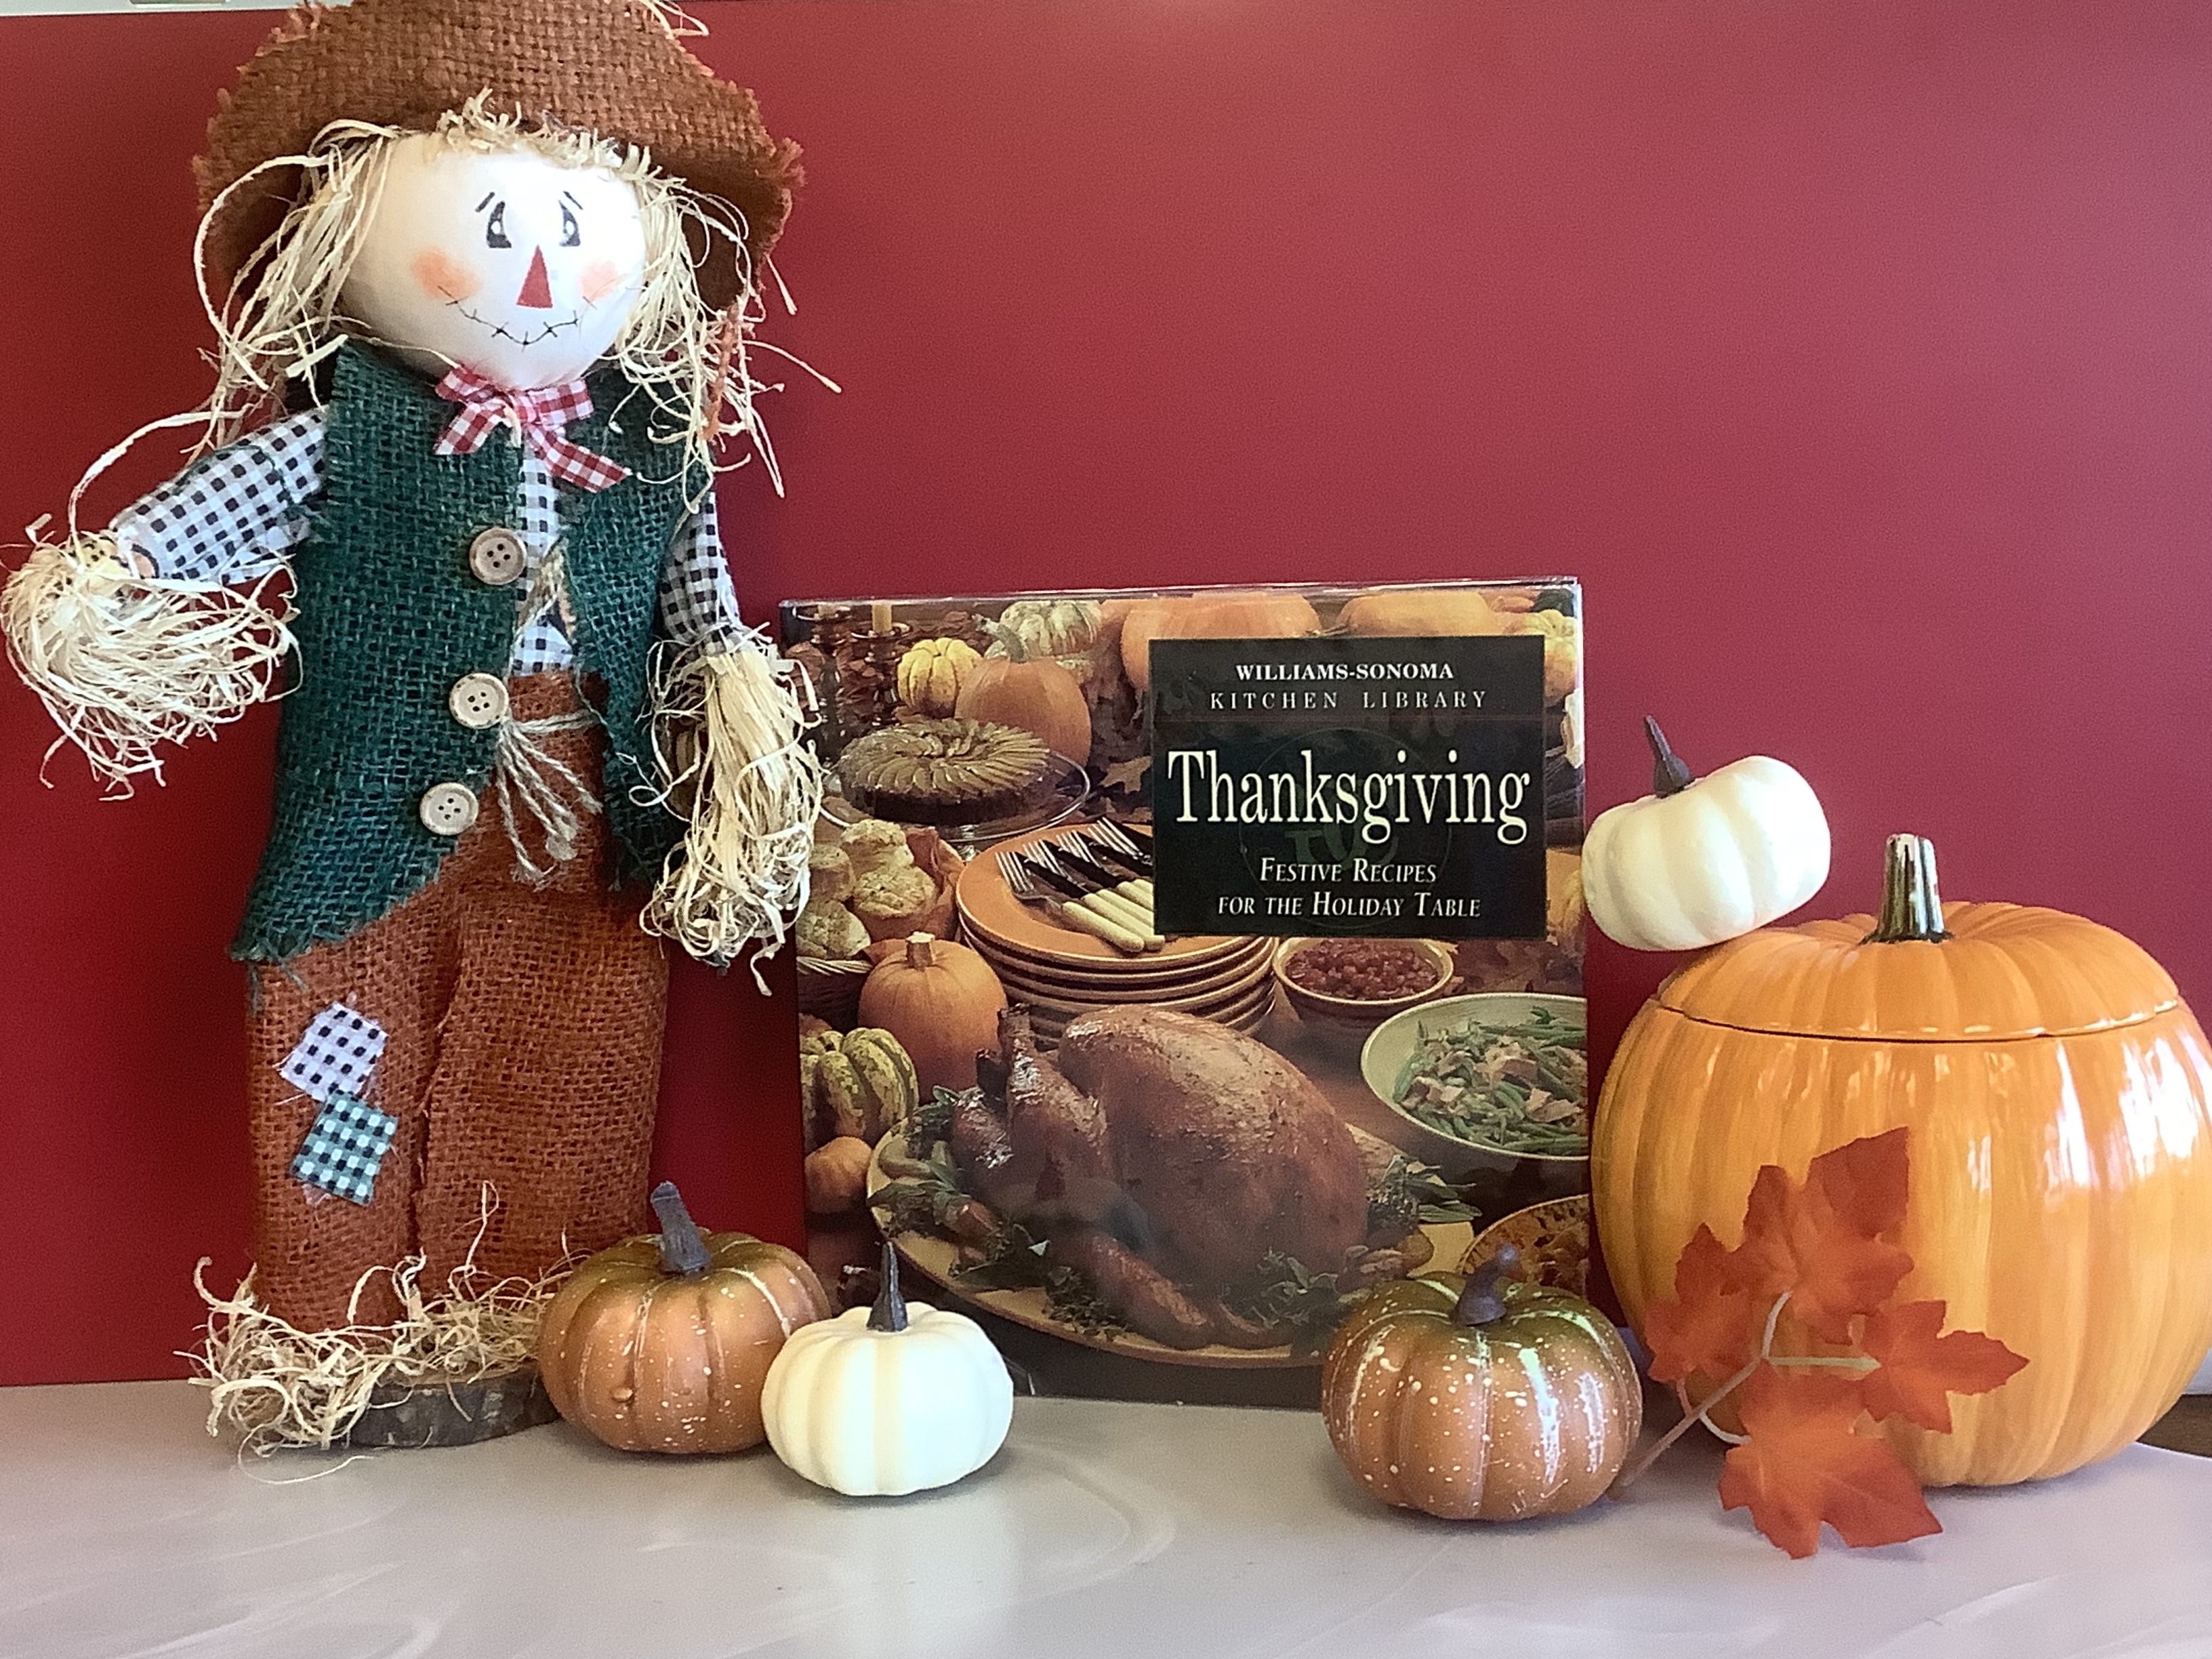 A scarecrow and some decorative pumpkins surrounding the Williams Sonoma Kitchen Library Book for Thanksgiving